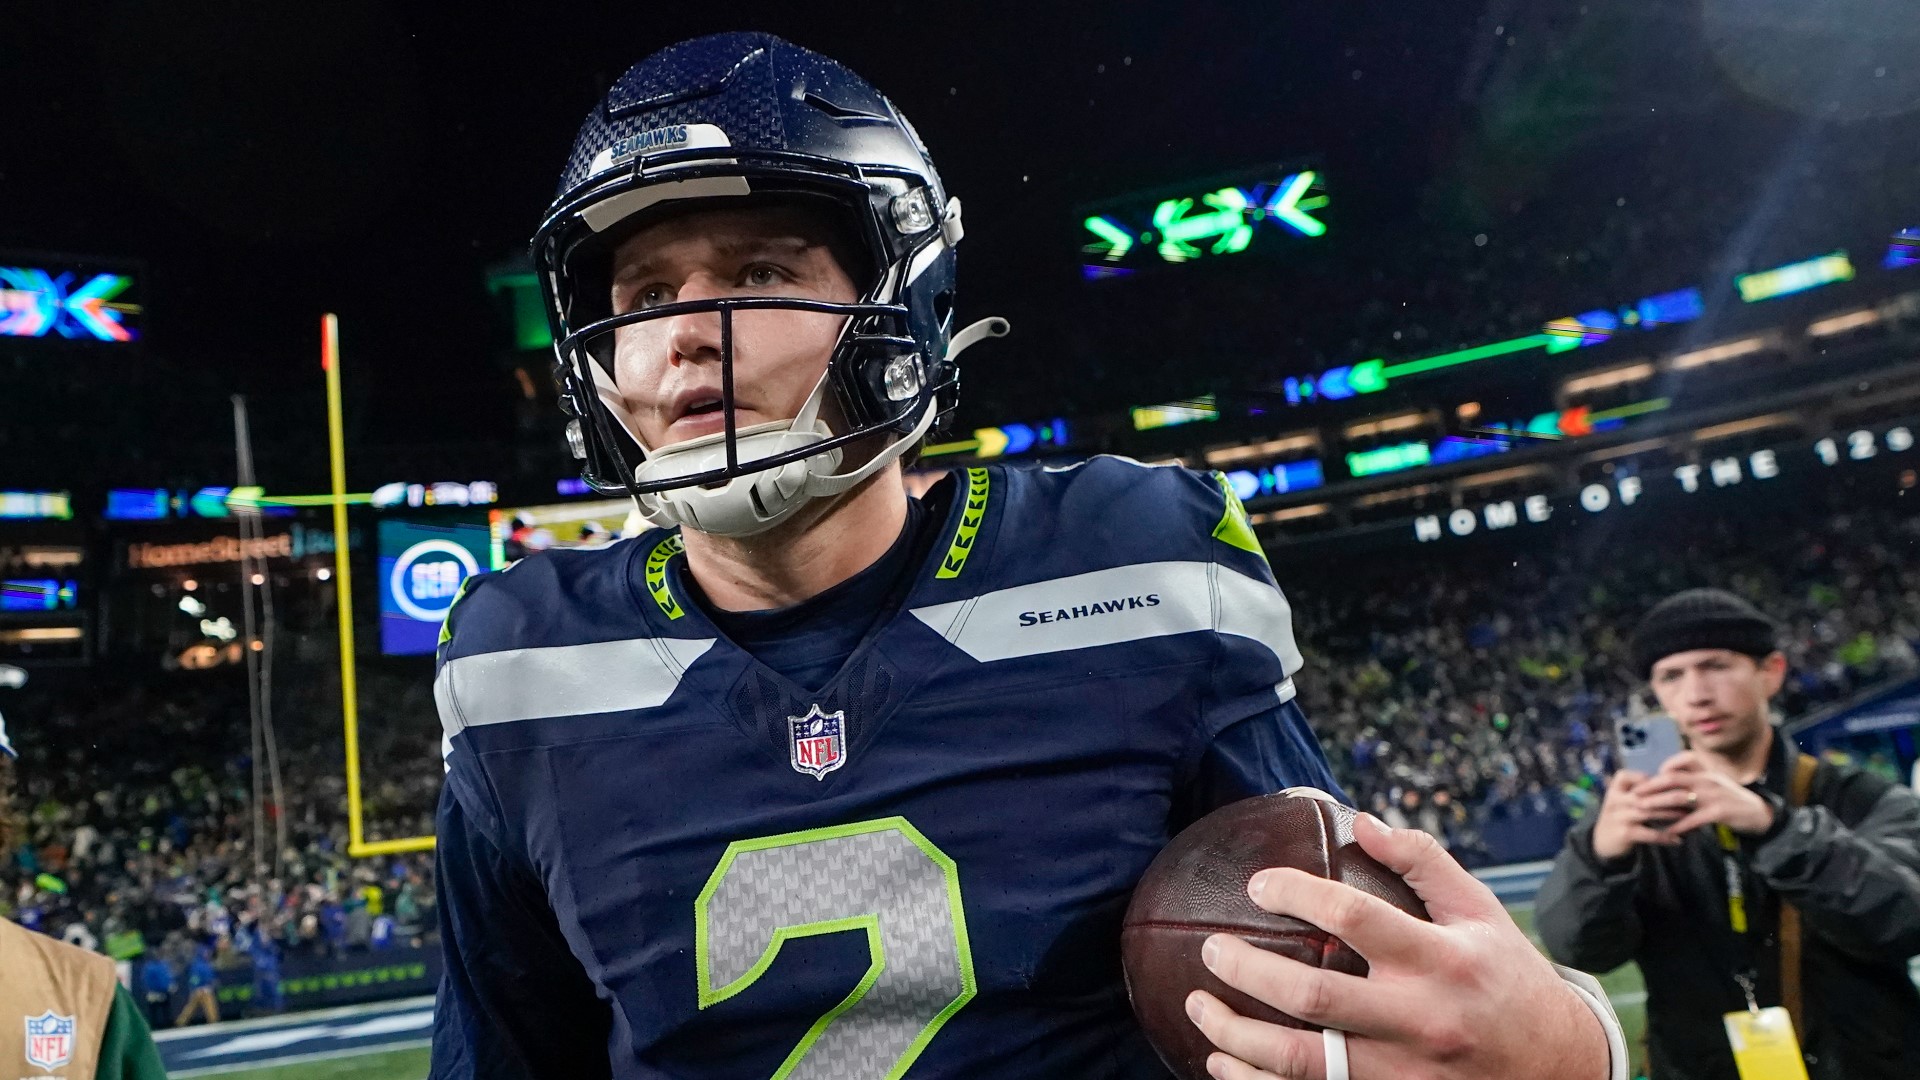 Drew Lock led the Seahawks to a dramatic 20-17 comeback win over the Eagles on Monday Night Football.